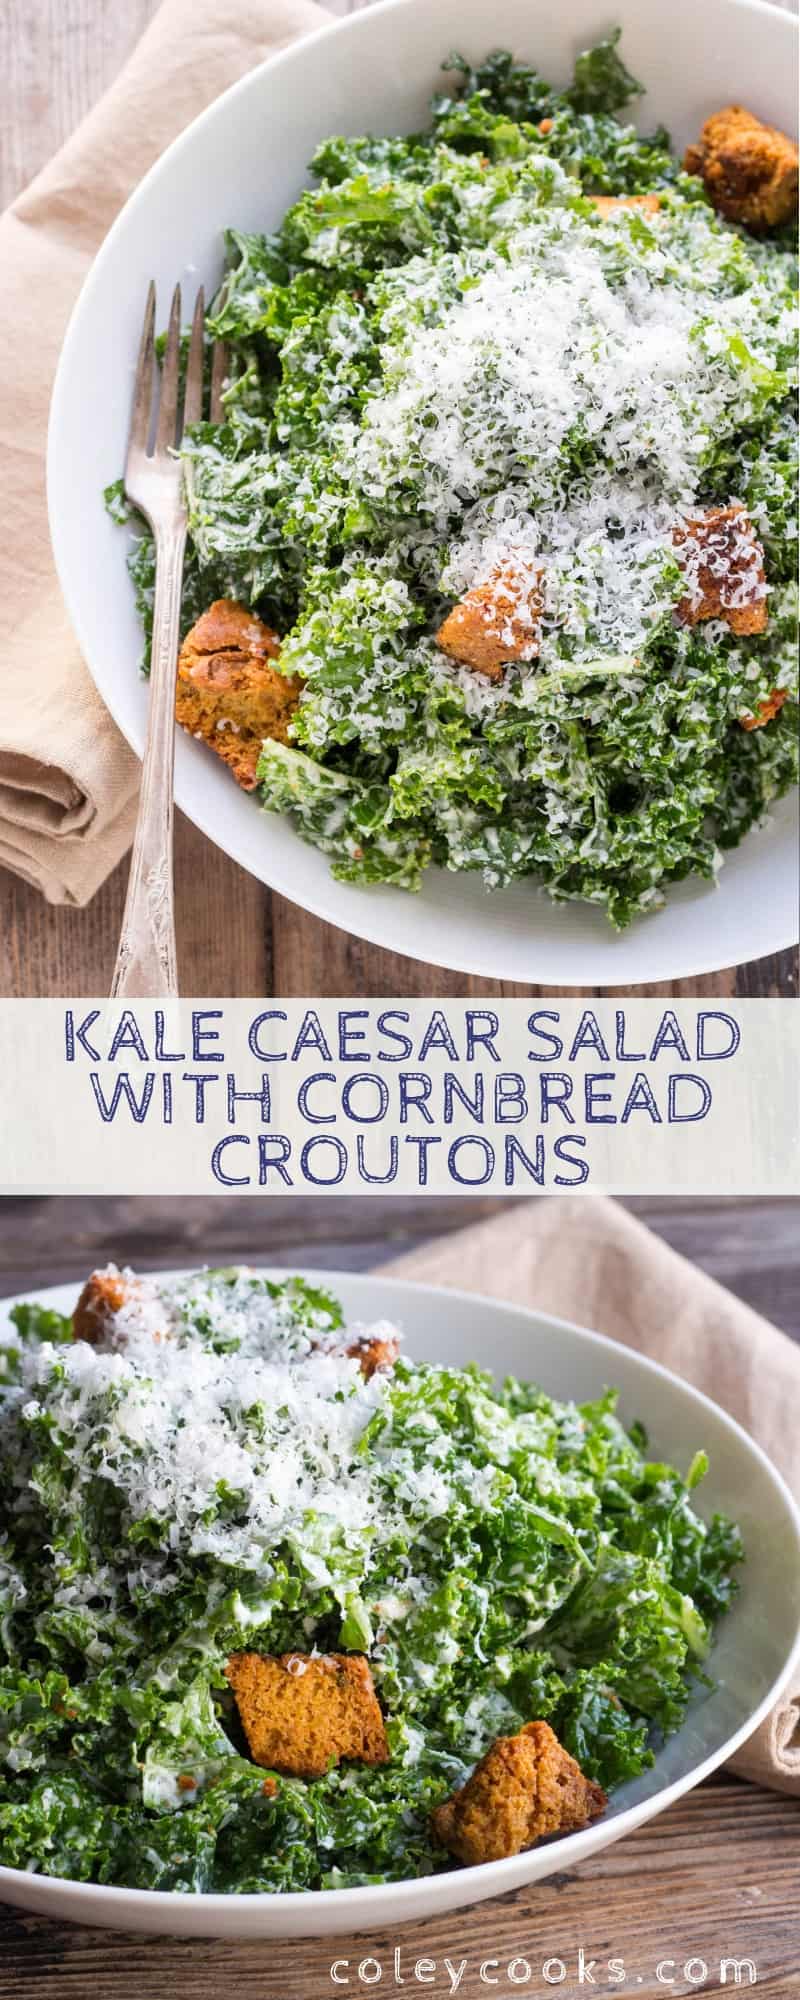 This easy recipe for Kale Caesar Salad is made with tender massaged kale and a traditional homemade Caesar dressing with anchovies. #easy #kale #massaged #caesar #salad #cornbread #croutons #anchovies #cheese #homemade  | ColeyCooks.com